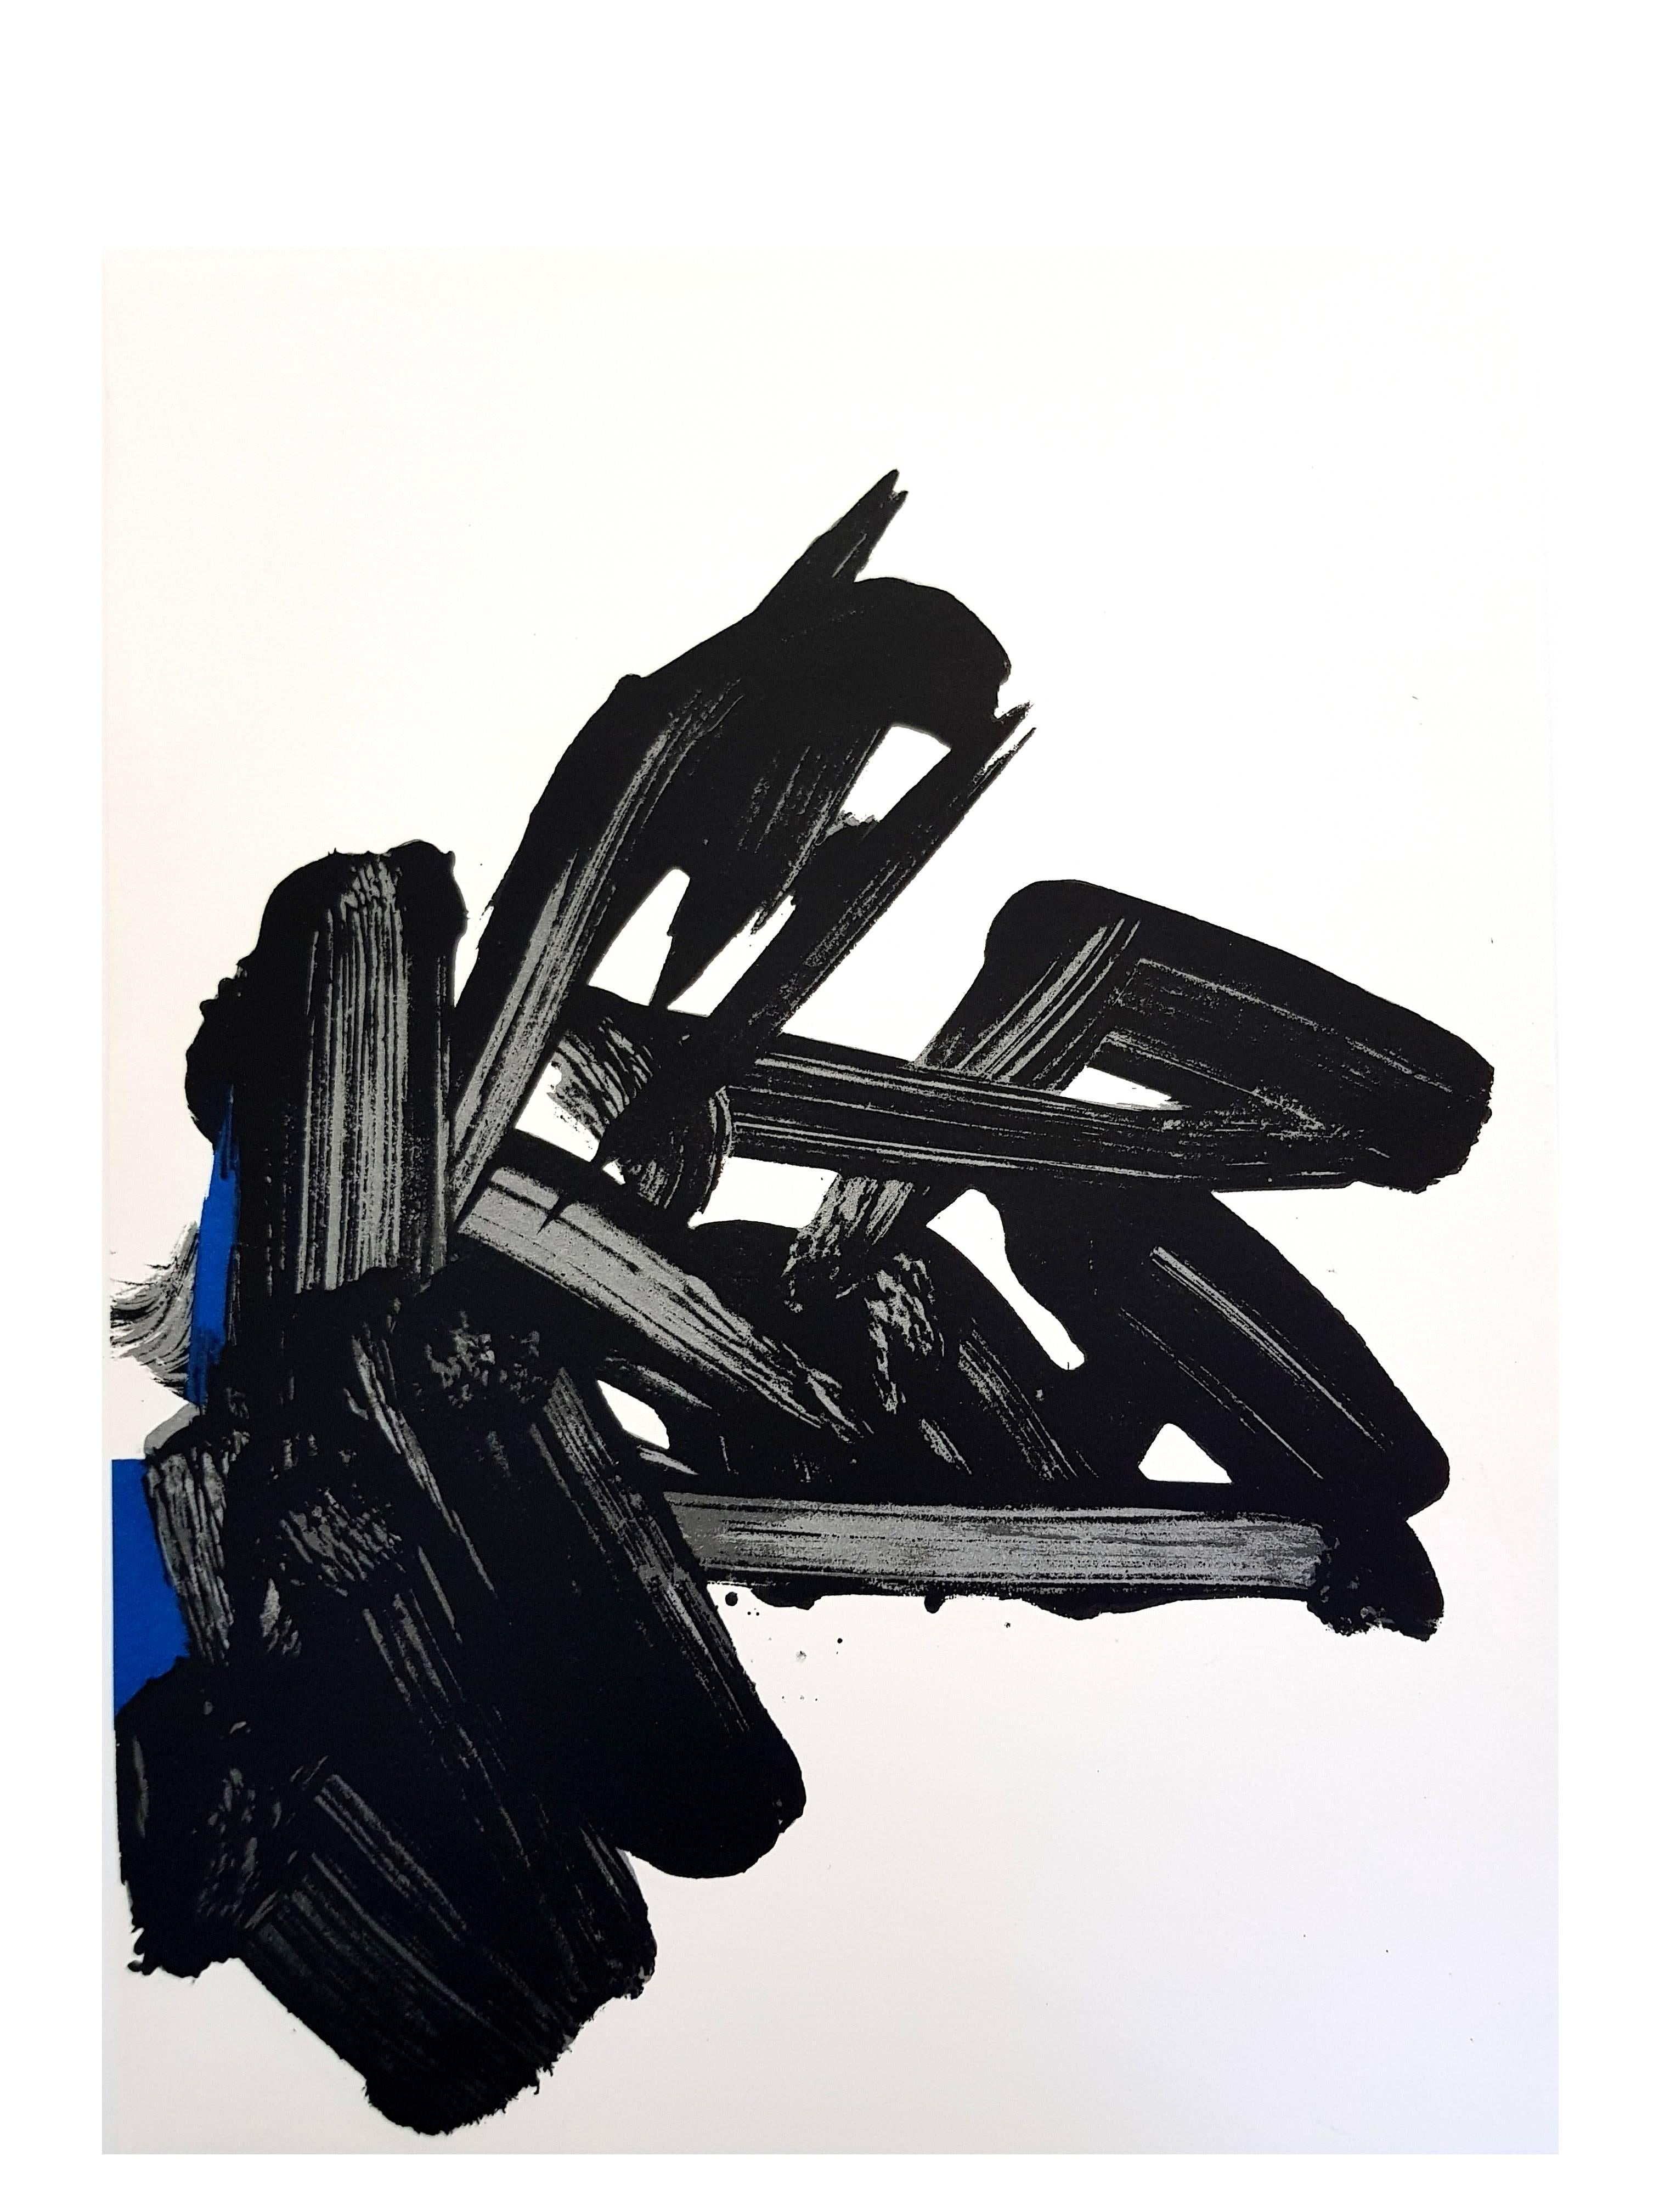 Pierre Soulages - Original Lithograph
Lithograph N.17, 1964 (BNF, 63) 
Dimensions: 32 x 24 cm
Revue Art de France

Pierre Soulages or the "painter of black" as he is often referred to, has rightfully become one of the key international figures of